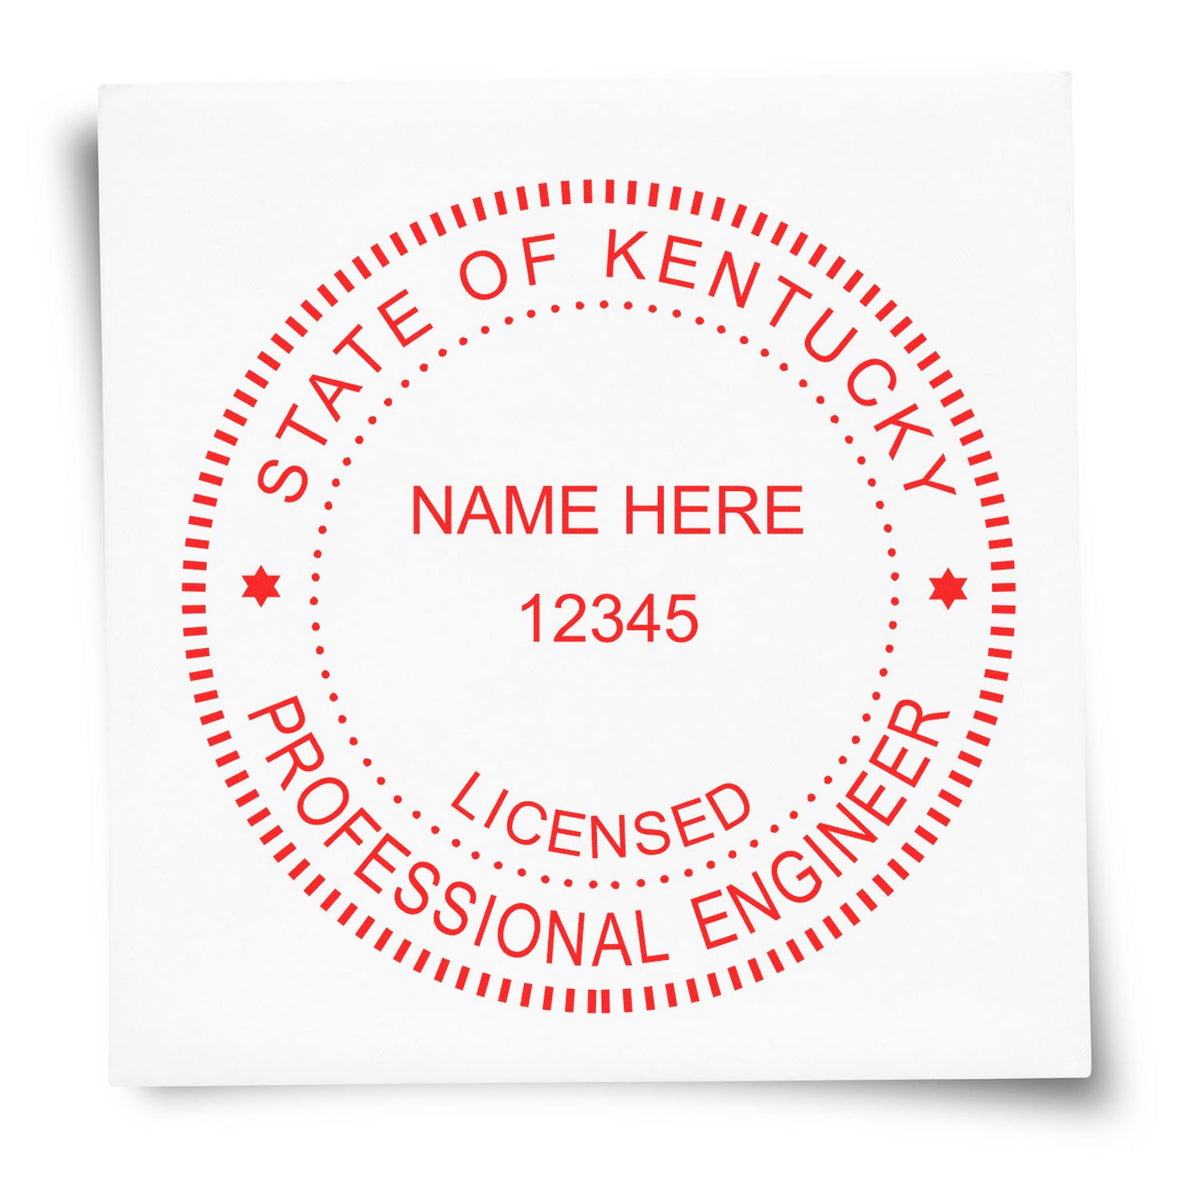 A lifestyle photo showing a stamped image of the Kentucky Professional Engineer Seal Stamp on a piece of paper